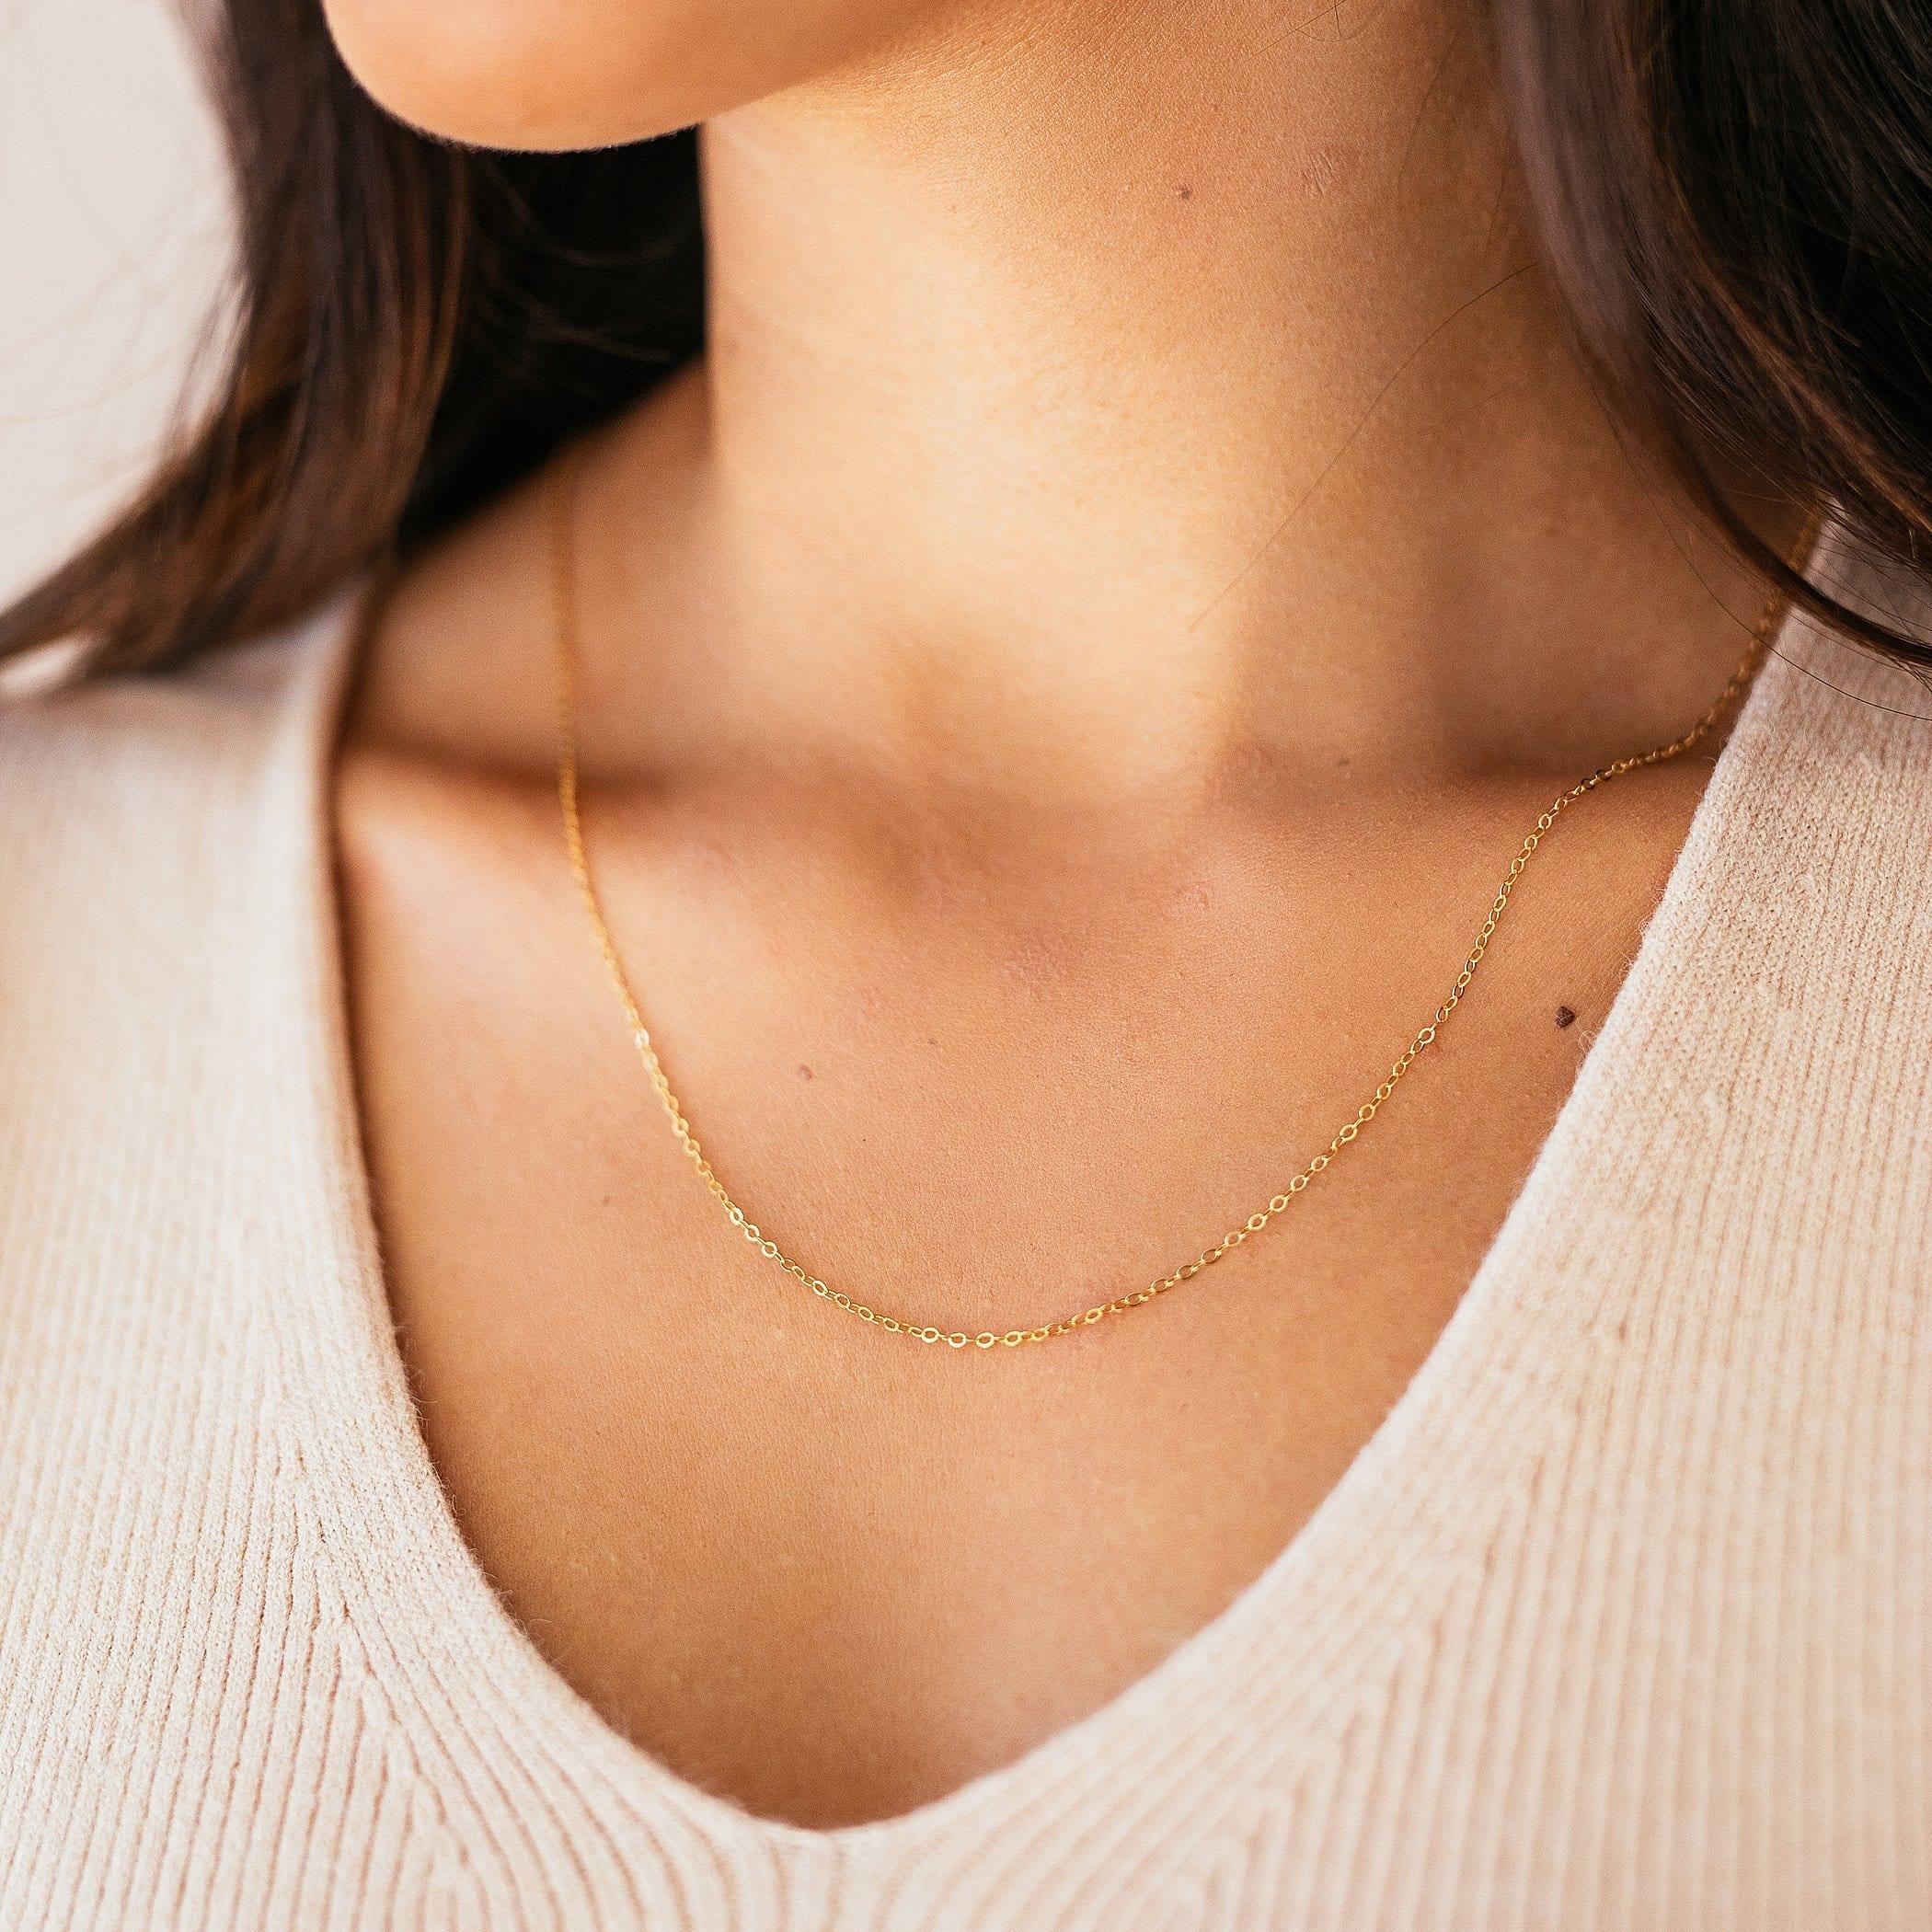 Whisper Chain Necklace - Nolia Jewelry - Meaningful + Sustainably Handcrafted Jewelry